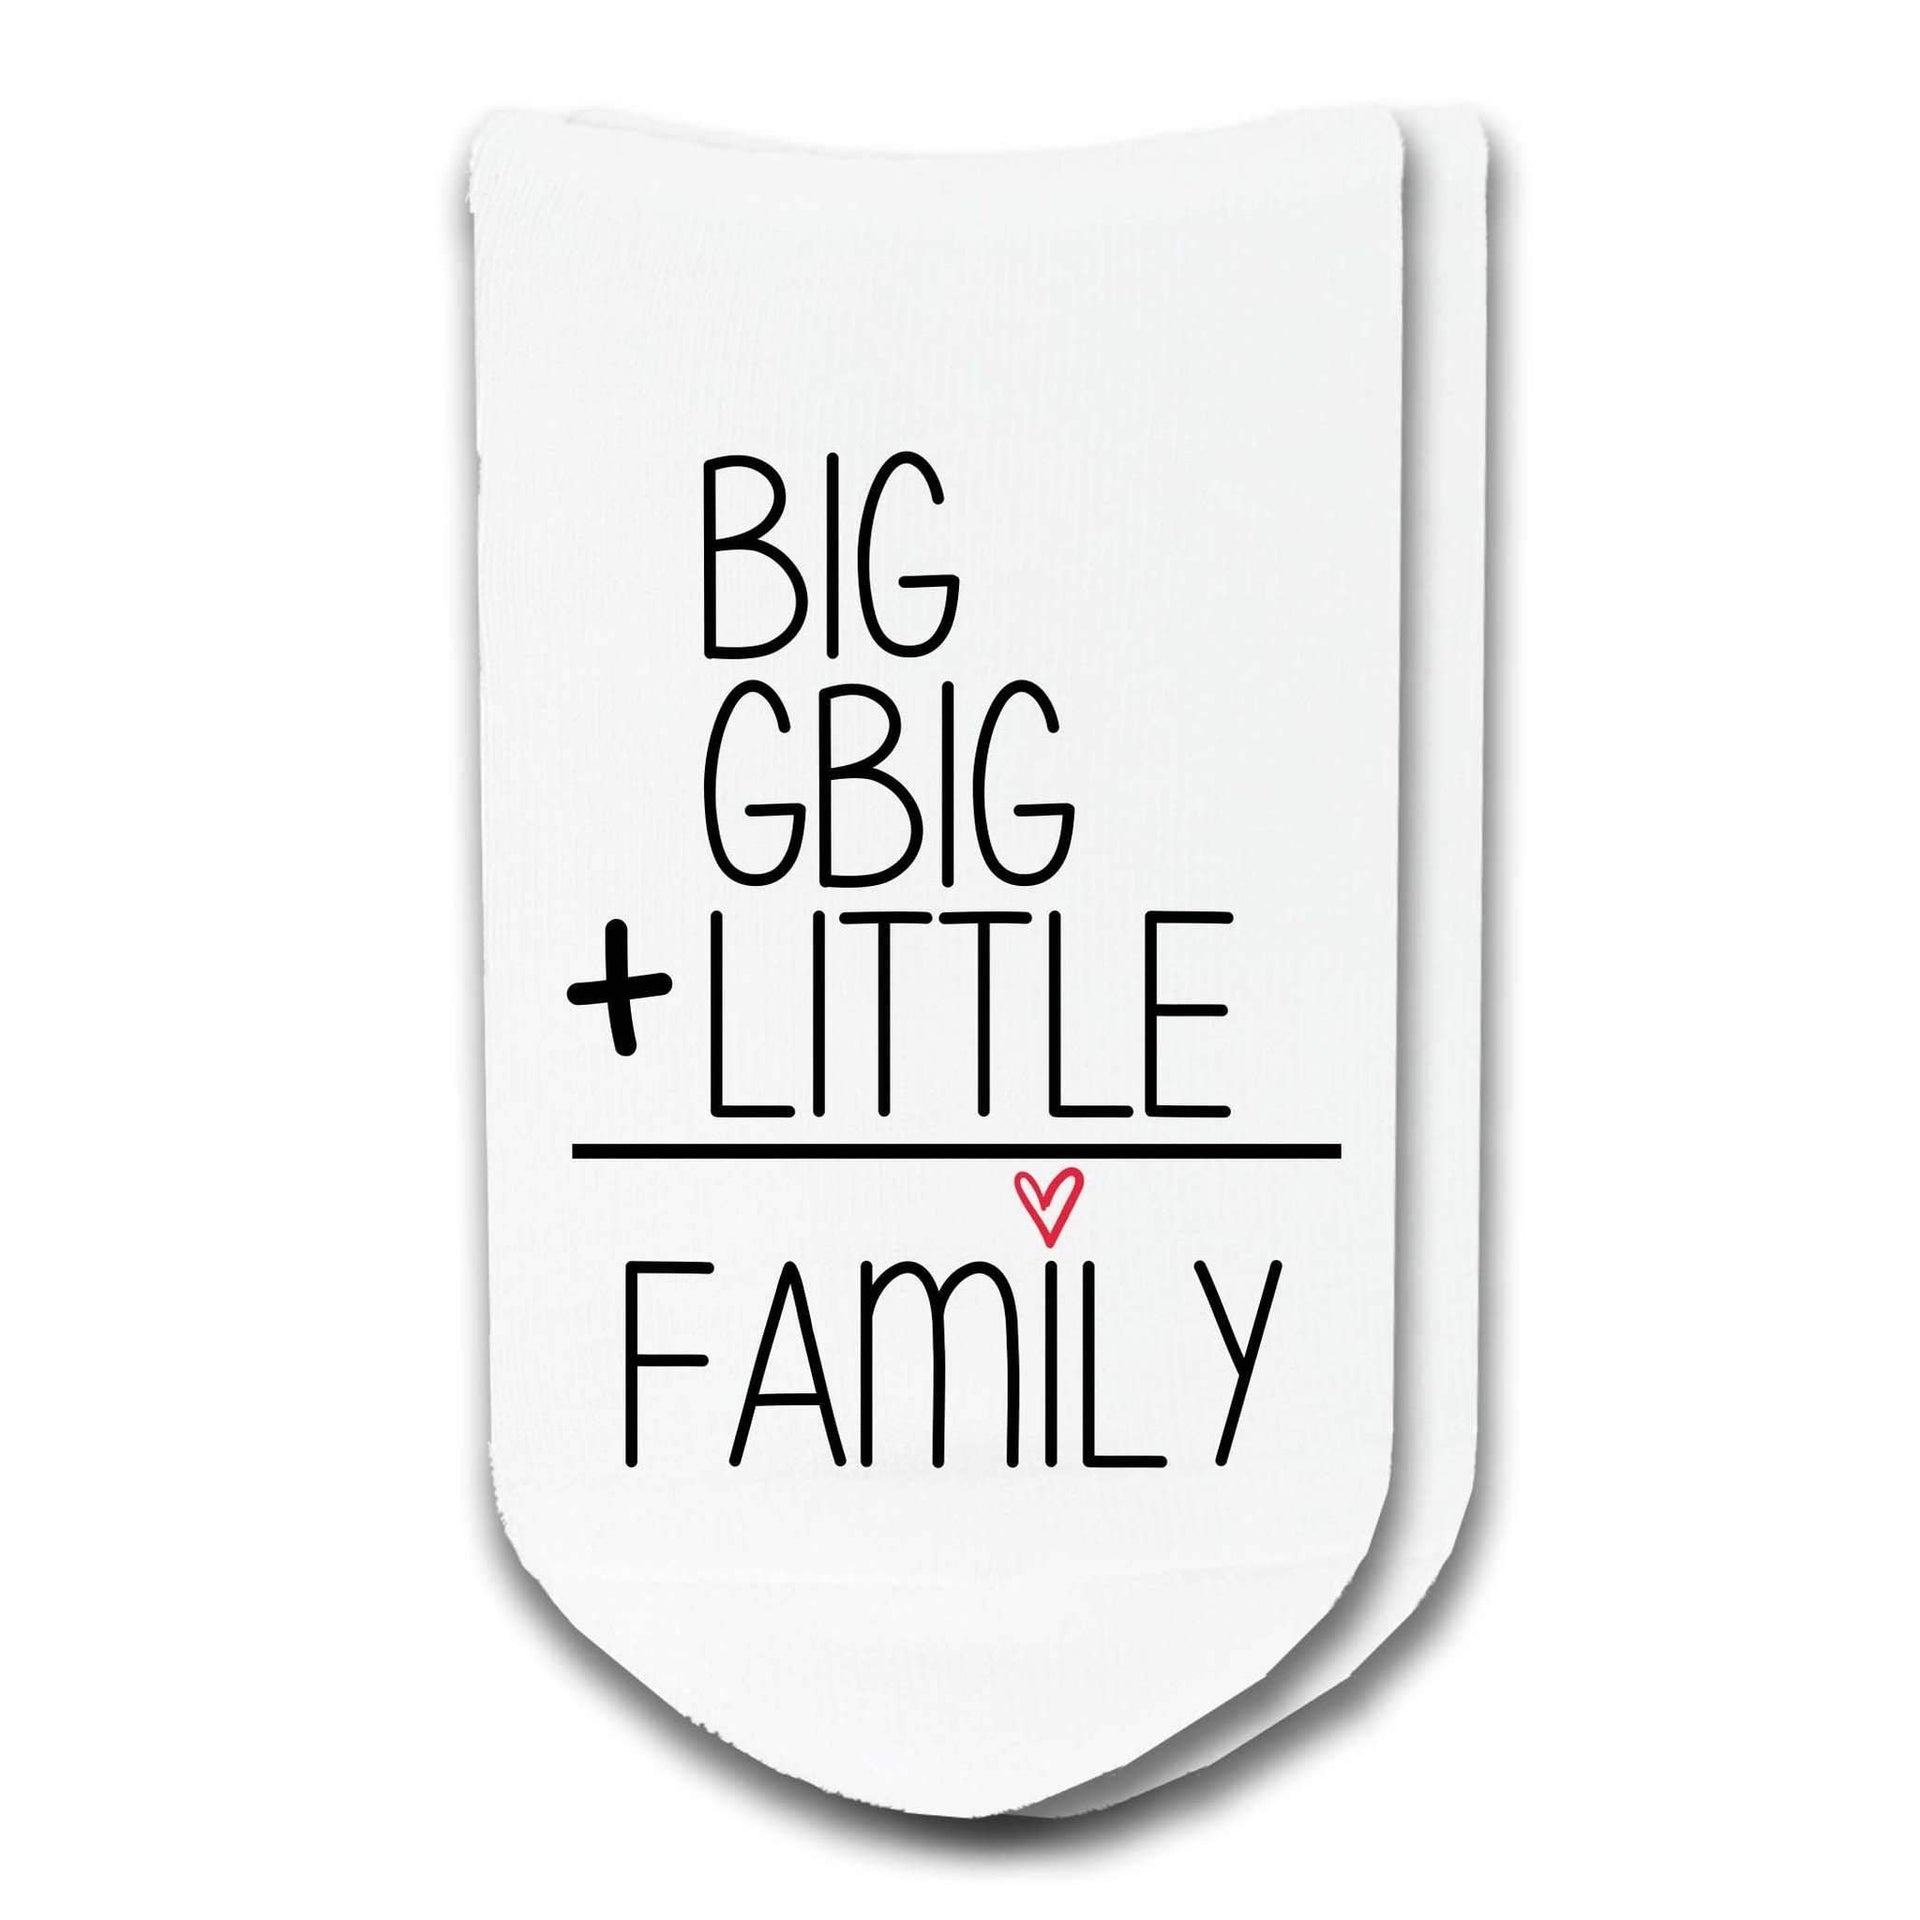 Big, GBIG, Little equals family math equation custom printed on the top of the white cotton no show socks.